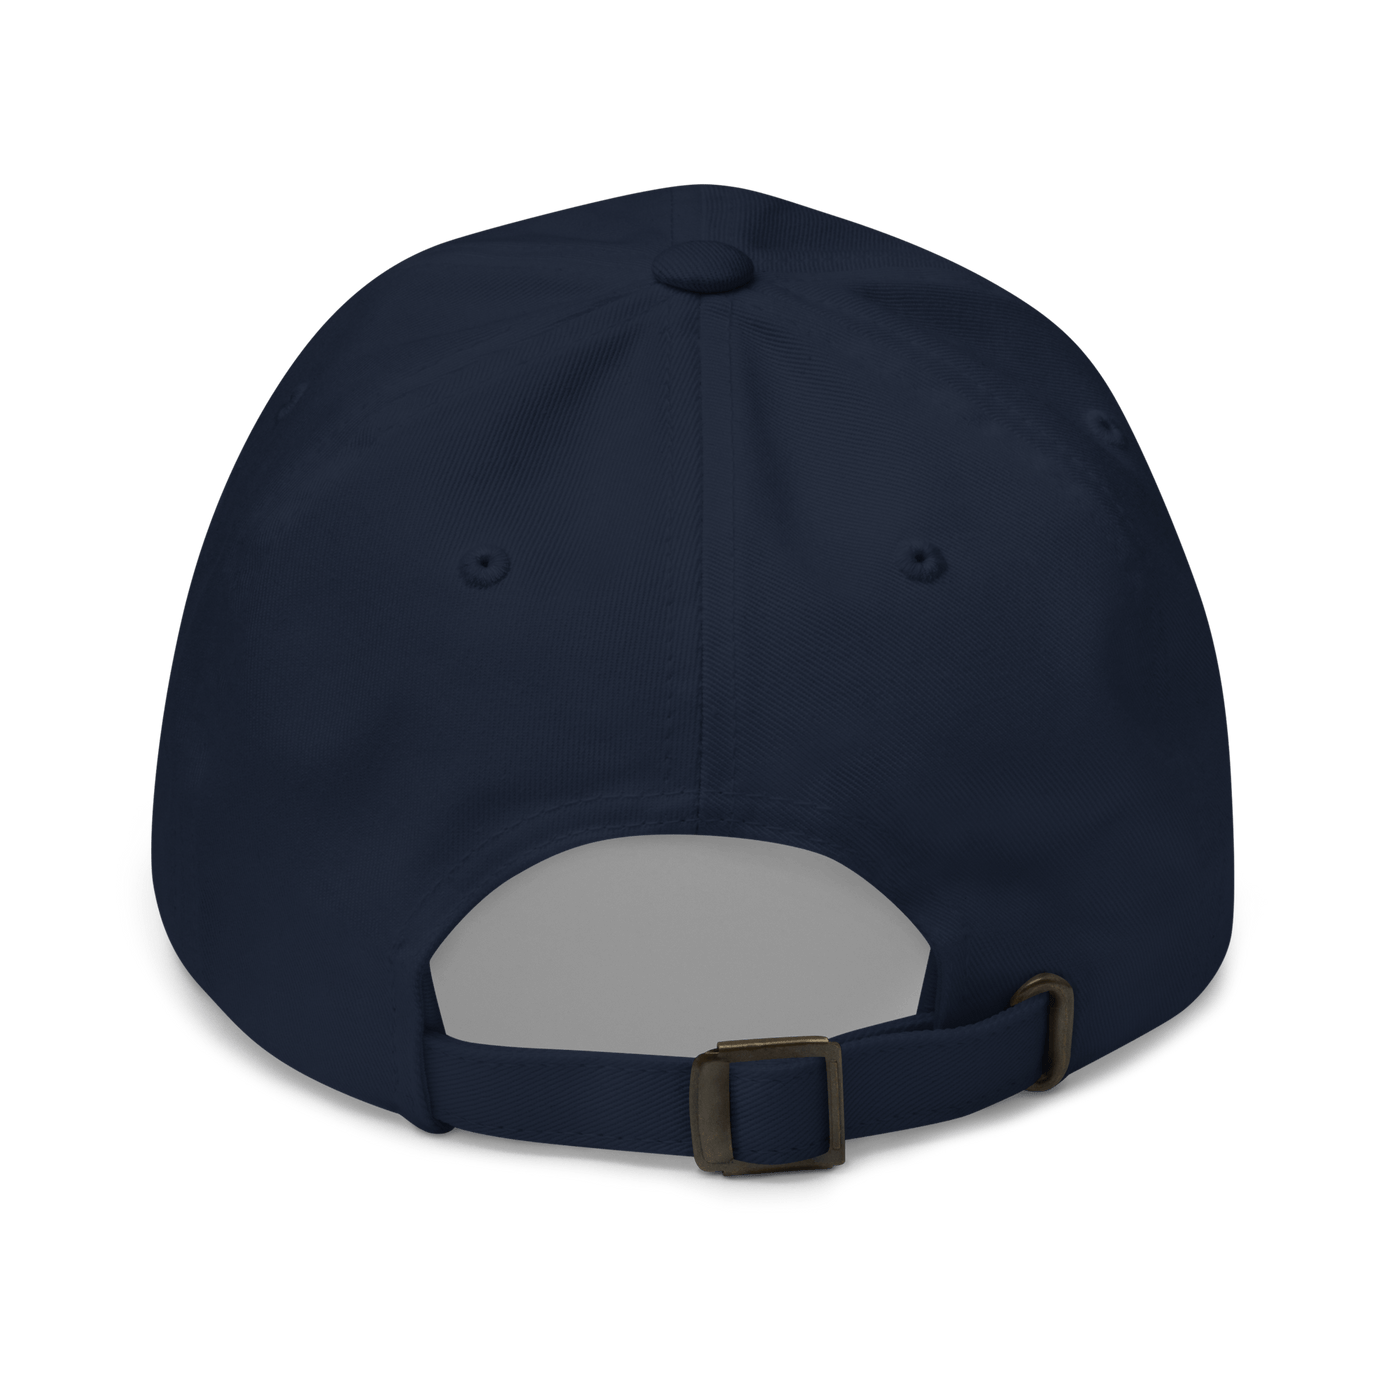 Lonely Duck Dad hat - Navy - - Just Another Cap Store